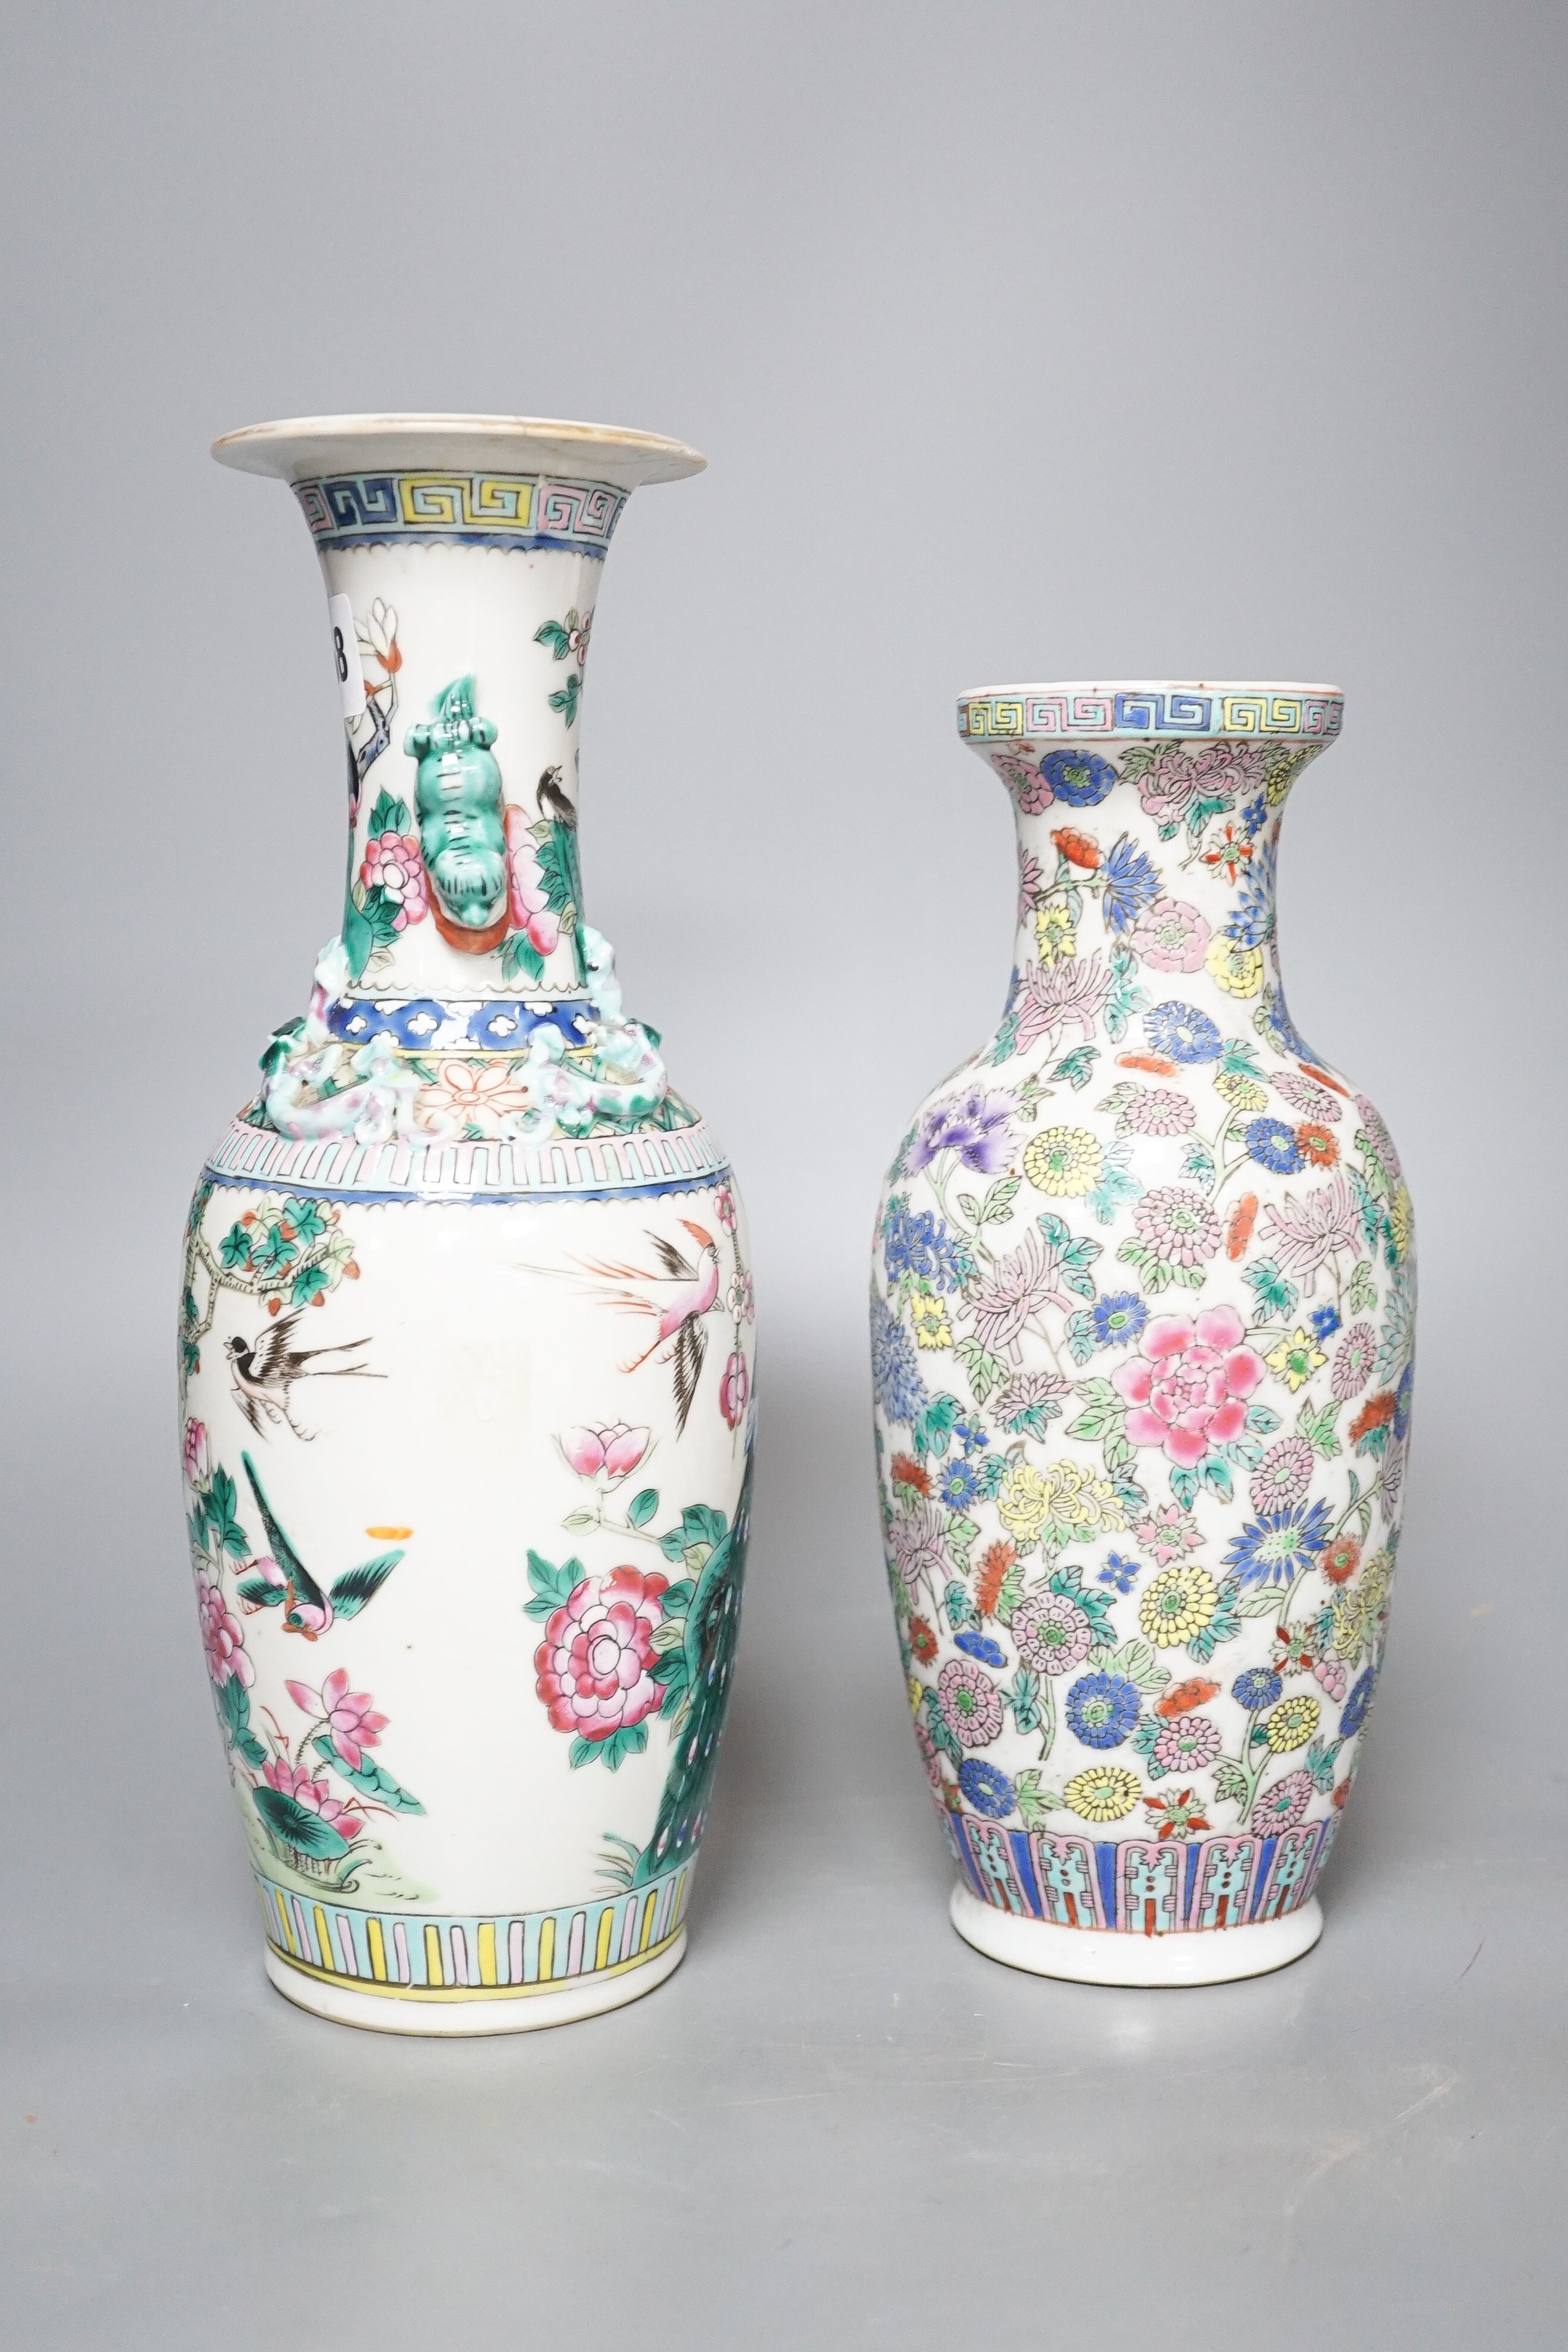 A Chinese famille rose ‘phoenix’ vase and another famille rose vase 30cm